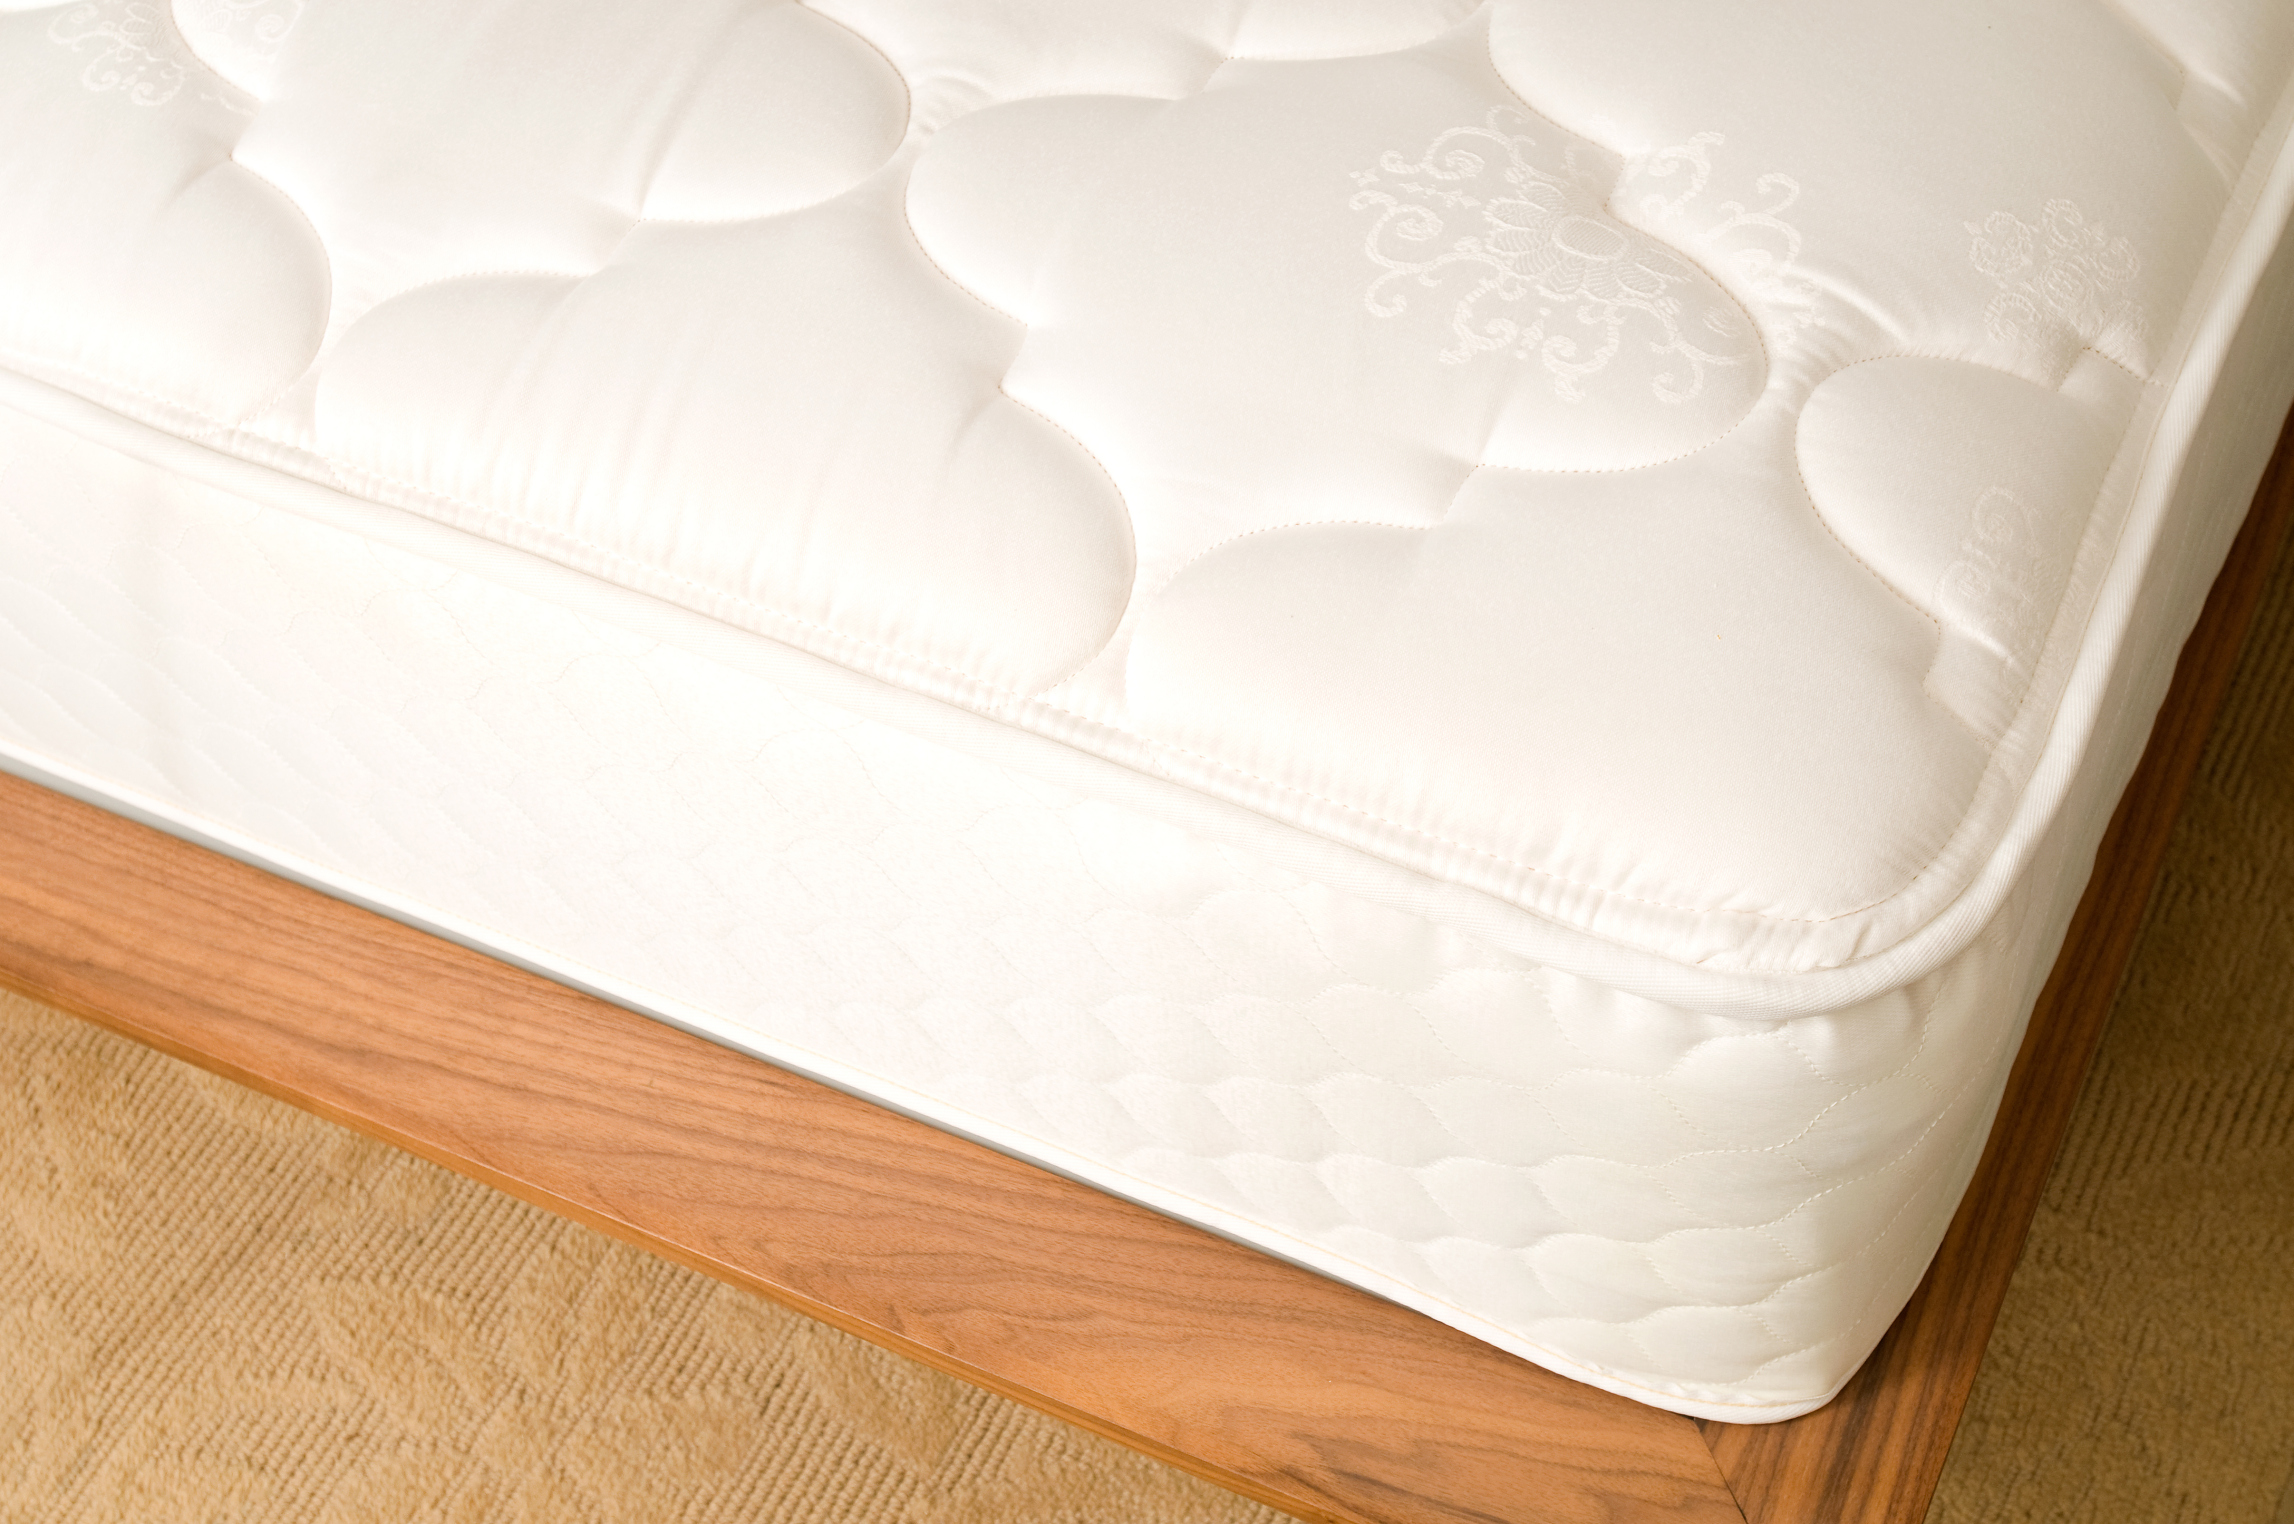 What Are The Benefits Of Airing Out A New Mattress?